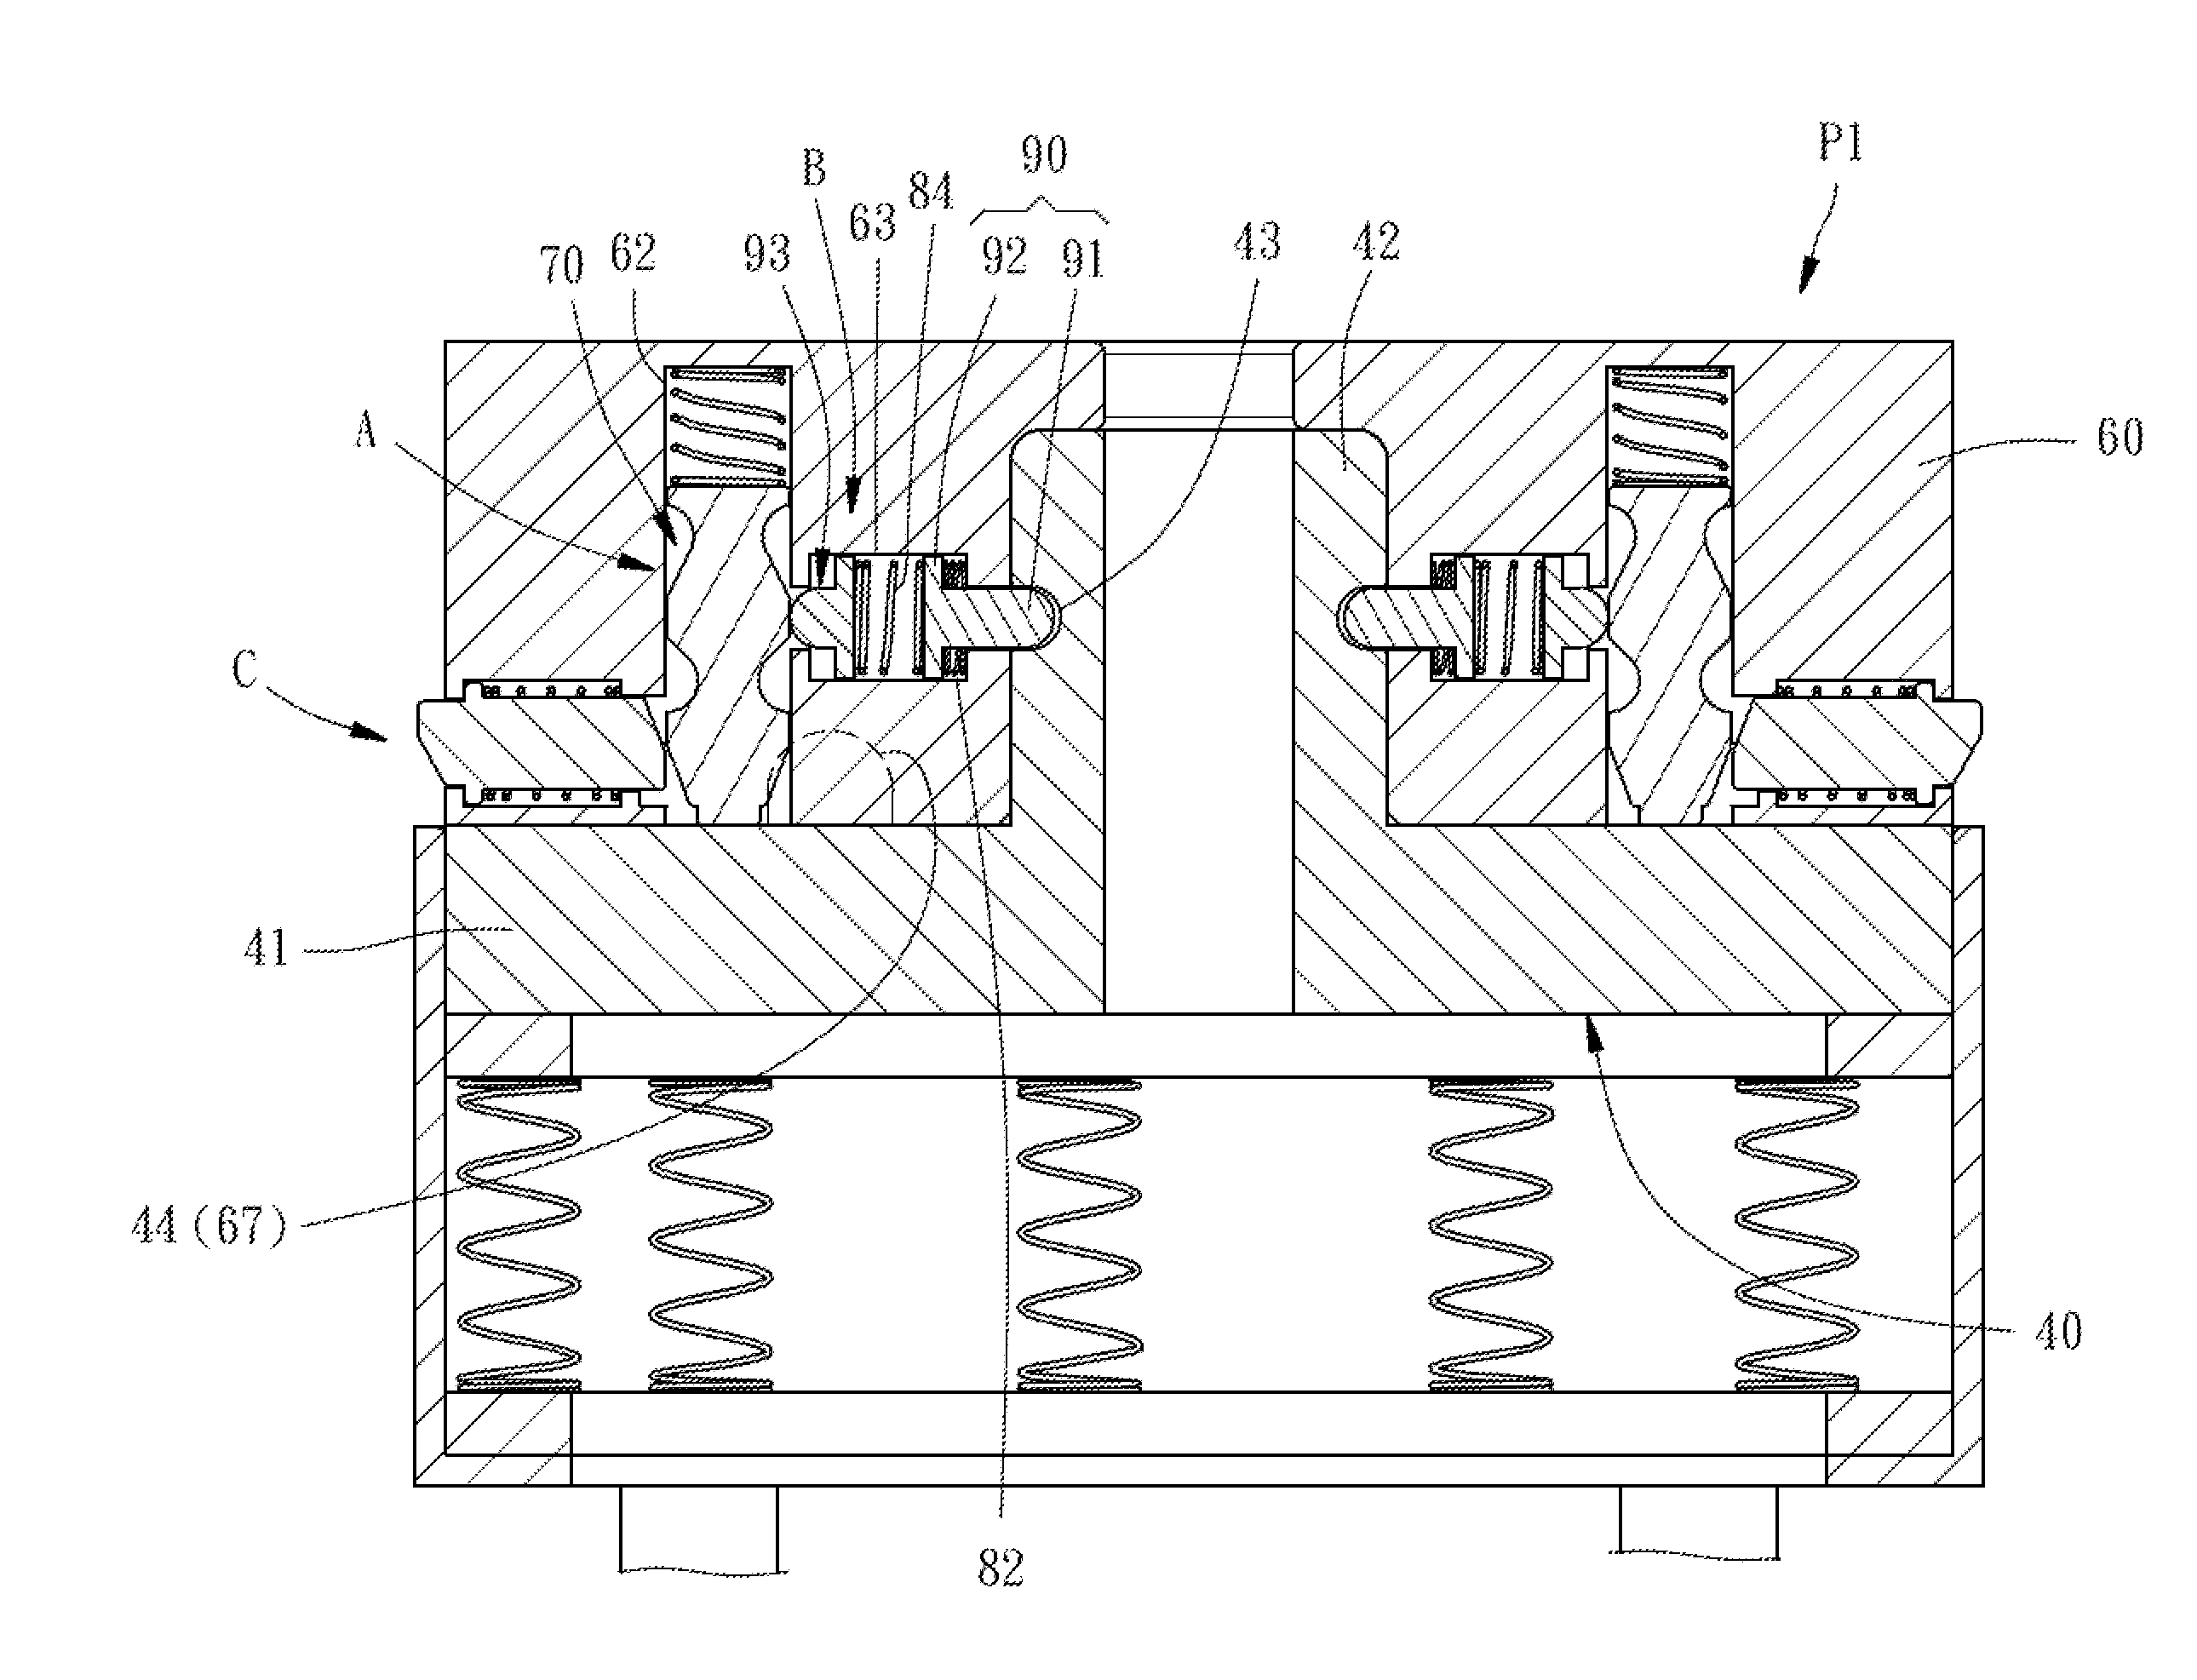 Mechanical end-effector changer and method of using same